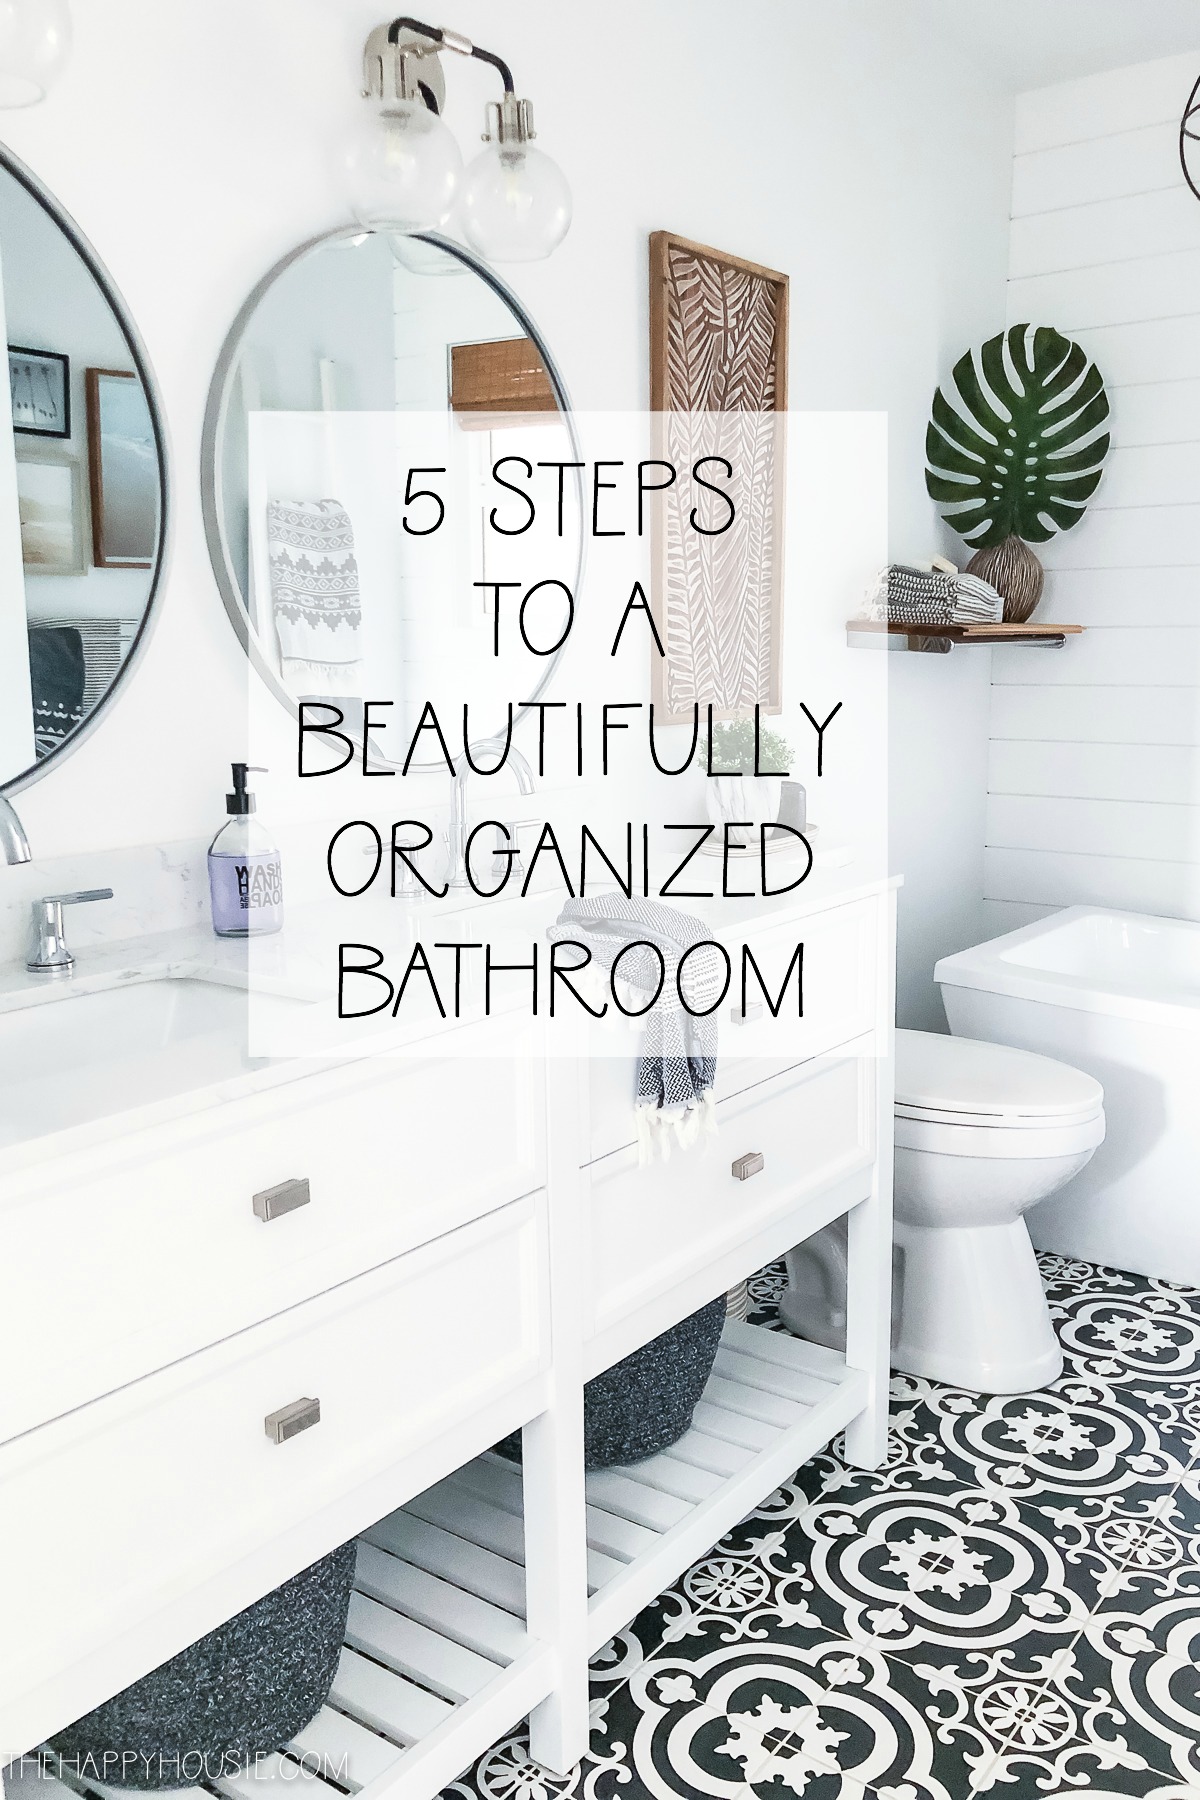 https://www.thehappyhousie.com/wp-content/uploads/2020/02/five-steps-to-a-beautifully-organized-bathroom-10-week-organizing-challenge-at-the-happy-housie.jpg